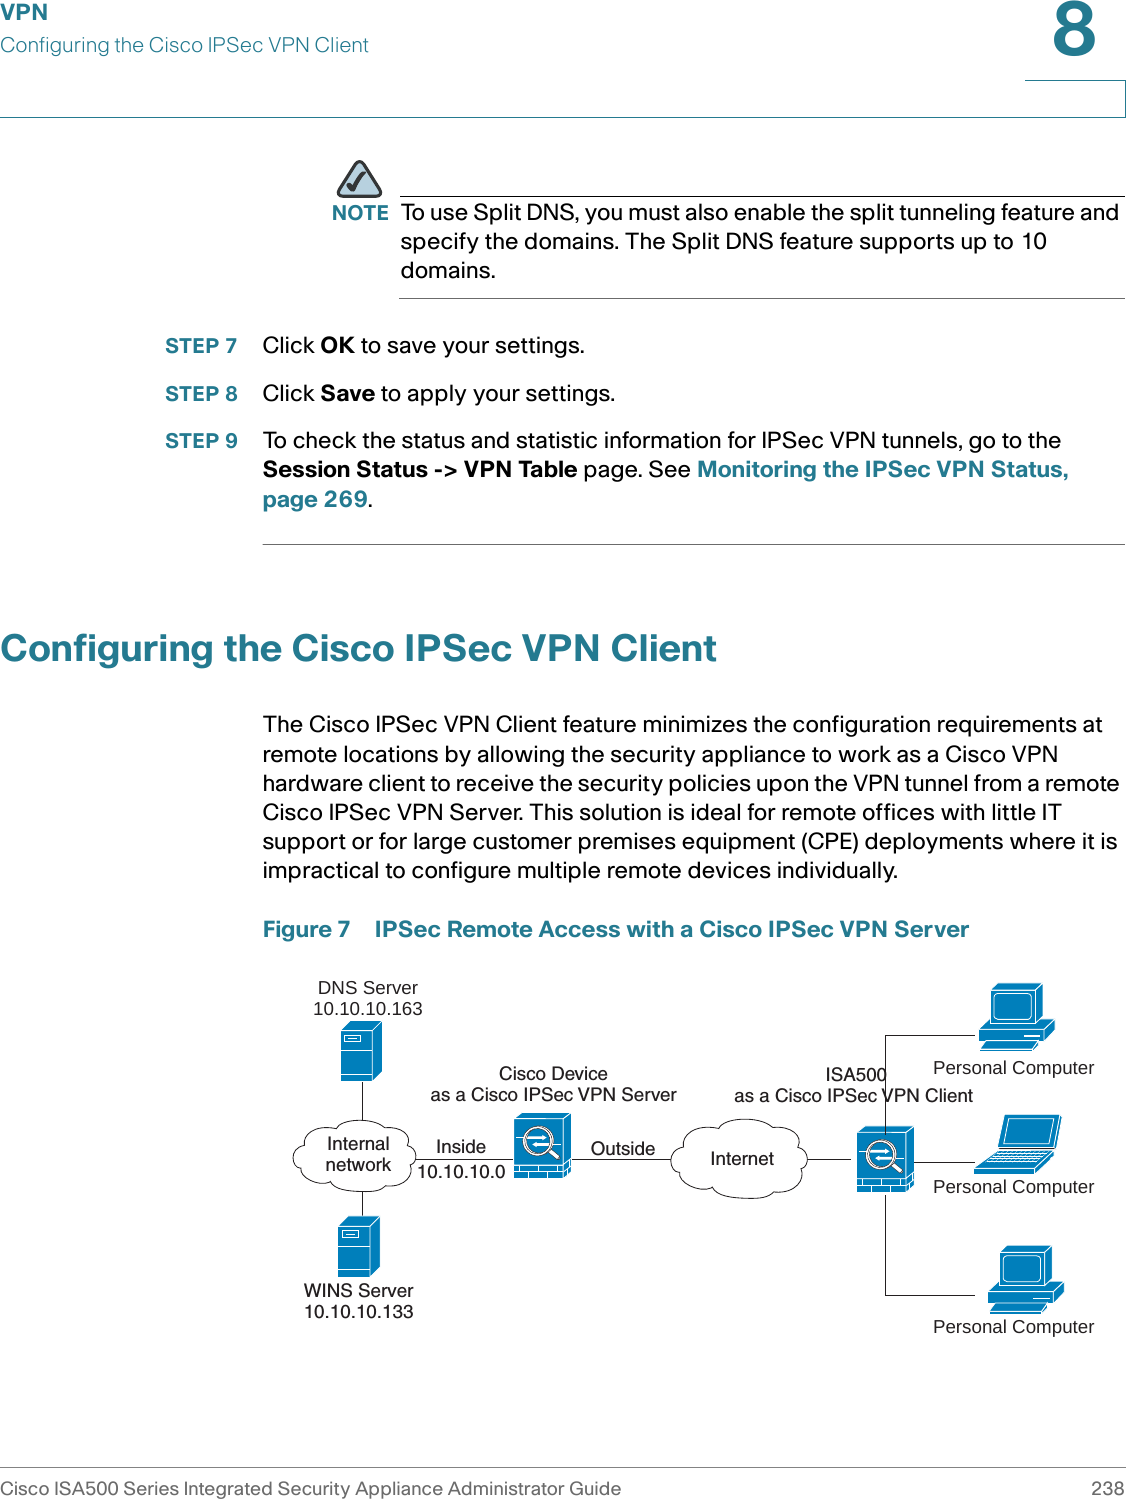 VPNConfiguring the Cisco IPSec VPN ClientCisco ISA500 Series Integrated Security Appliance Administrator Guide 2388 NOTE To use Split DNS, you must also enable the split tunneling feature and specify the domains. The Split DNS feature supports up to 10 domains. STEP 7 Click OK to save your settings.  STEP 8 Click Save to apply your settings. STEP 9 To check the status and statistic information for IPSec VPN tunnels, go to the Session Status -&gt; VPN Table page. See Monitoring the IPSec VPN Status, page 269. Configuring the Cisco IPSec VPN ClientThe Cisco IPSec VPN Client feature minimizes the configuration requirements at remote locations by allowing the security appliance to work as a Cisco VPN hardware client to receive the security policies upon the VPN tunnel from a remote Cisco IPSec VPN Server. This solution is ideal for remote offices with little IT support or for large customer premises equipment (CPE) deployments where it is impractical to configure multiple remote devices individually. Figure 7 IPSec Remote Access with a Cisco IPSec VPN ServerInside10.10.10.0OutsideCisco Deviceas a Cisco IPSec VPN ServerDNS Server10.10.10.163WINS Server10.10.10.133InternetInternalnetworkISA500as a Cisco IPSec VPN Client Personal ComputerPersonal ComputerPersonal Computer